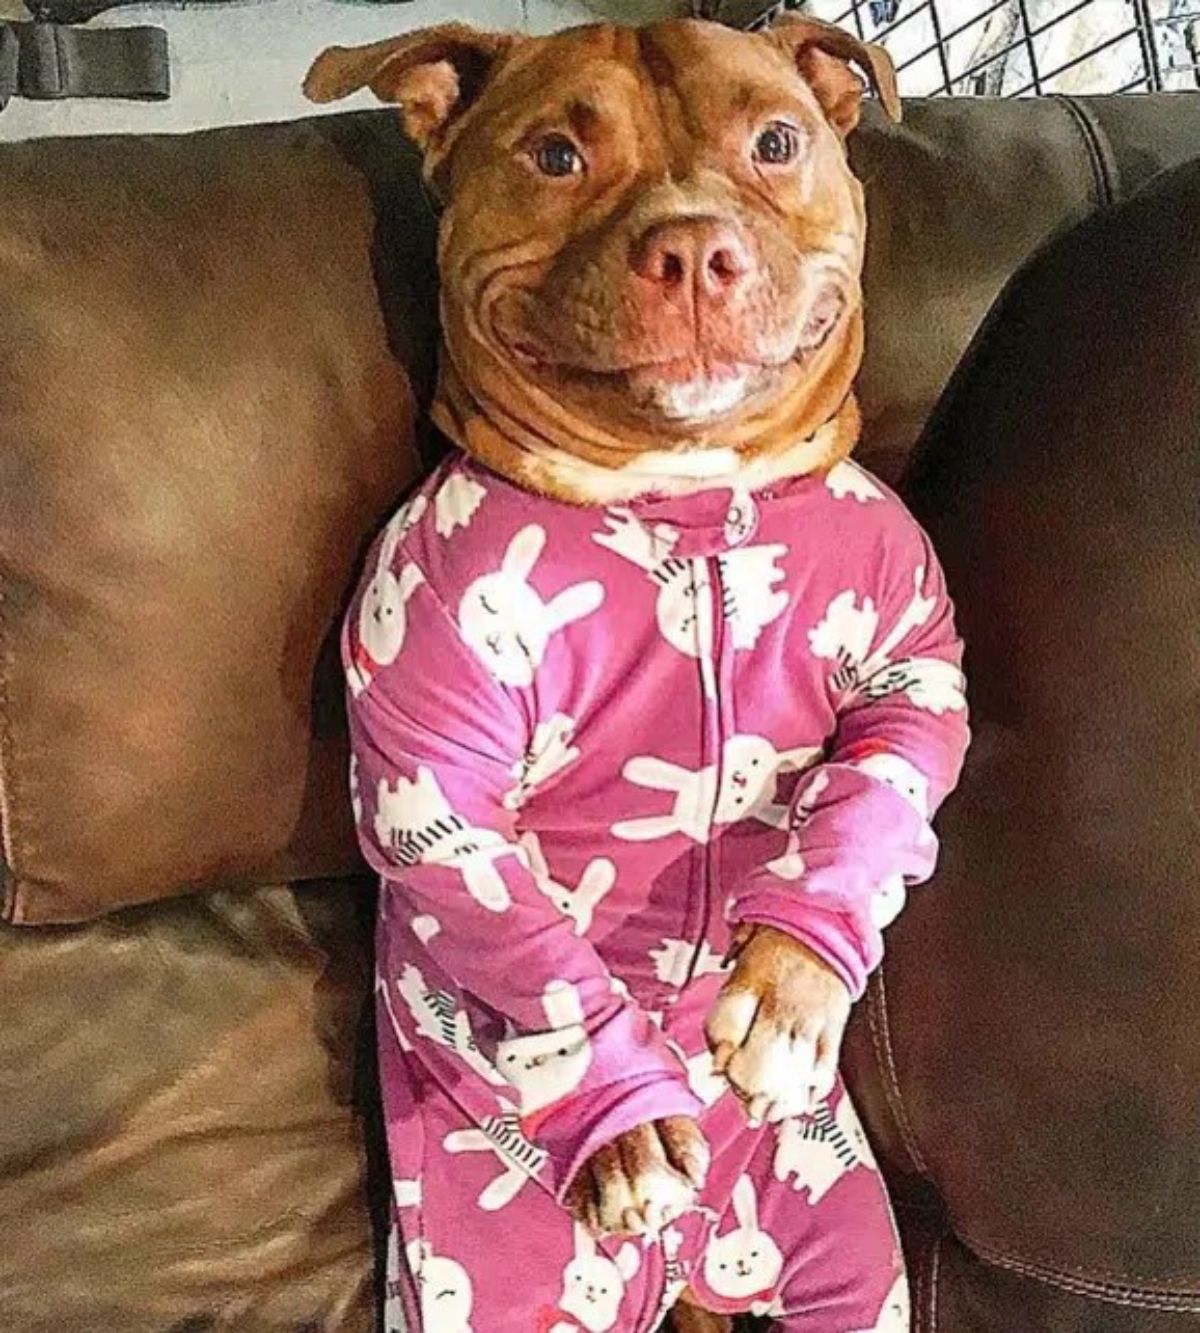 smiling brown and white pitbull sitting up wearing pink and white bunny onesie on a brown sofa